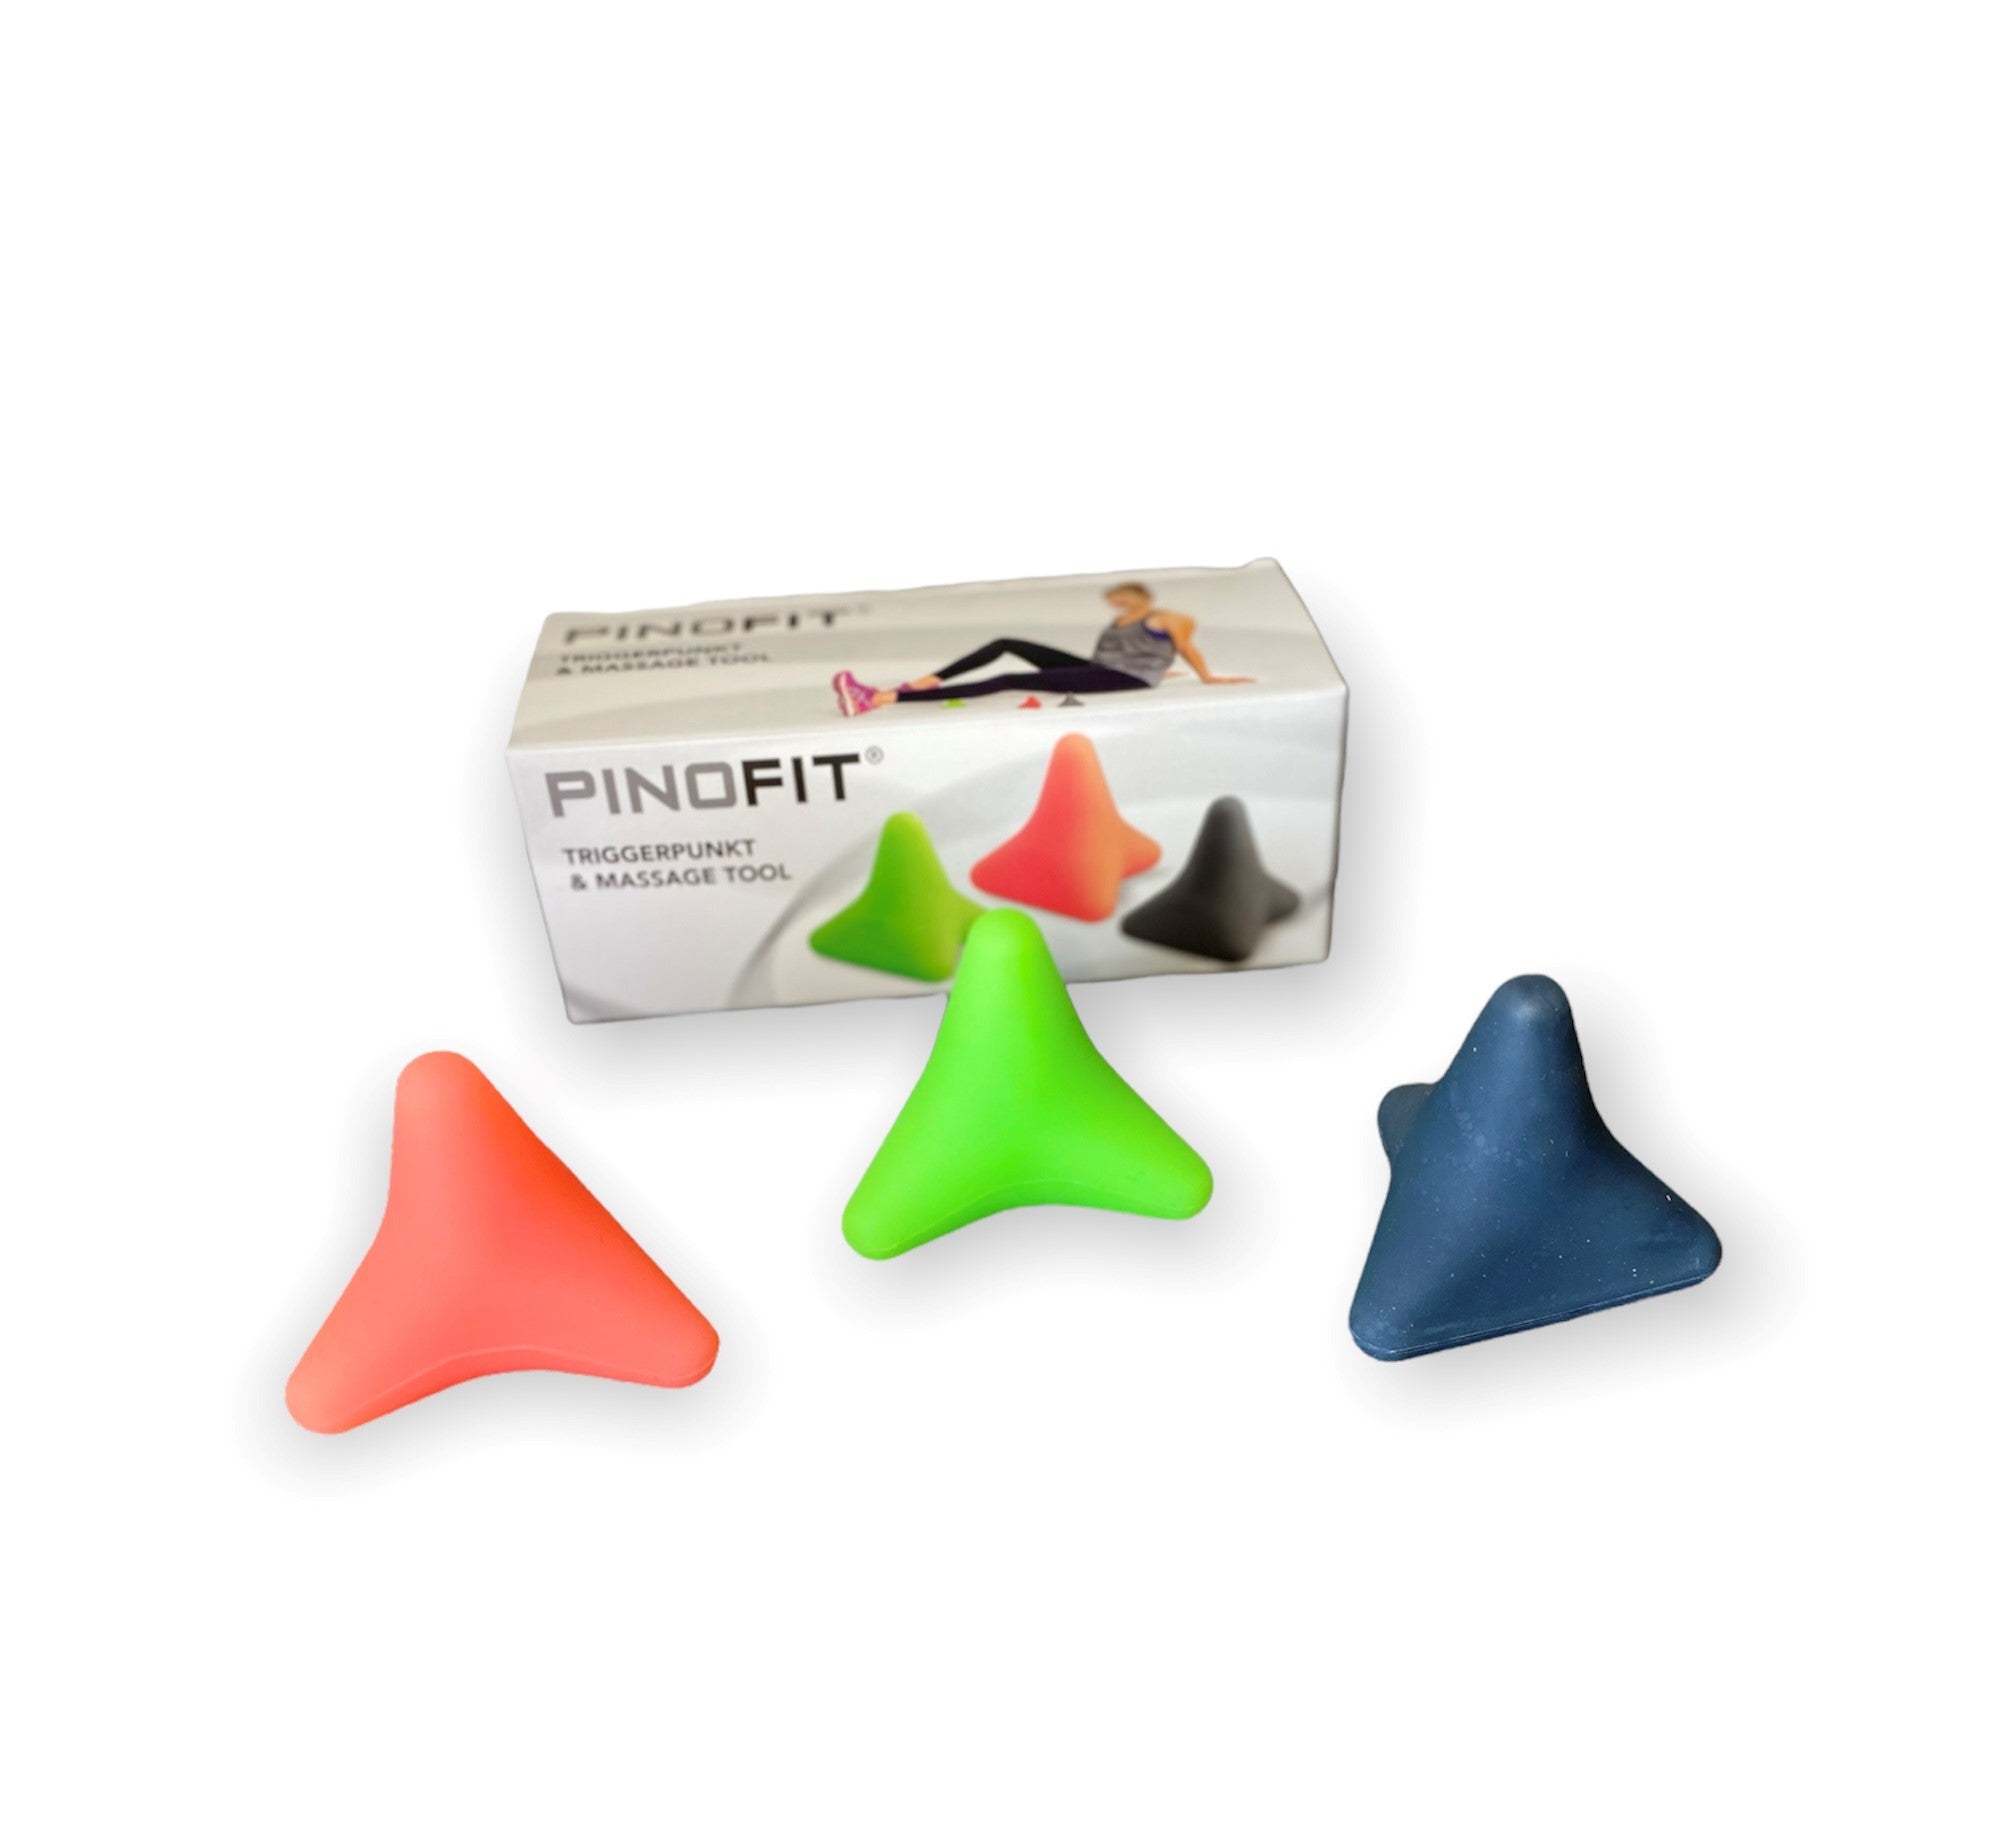 PINOFIT Trigger point & massage tool (Set of 3) – Western Therapeutic Supply